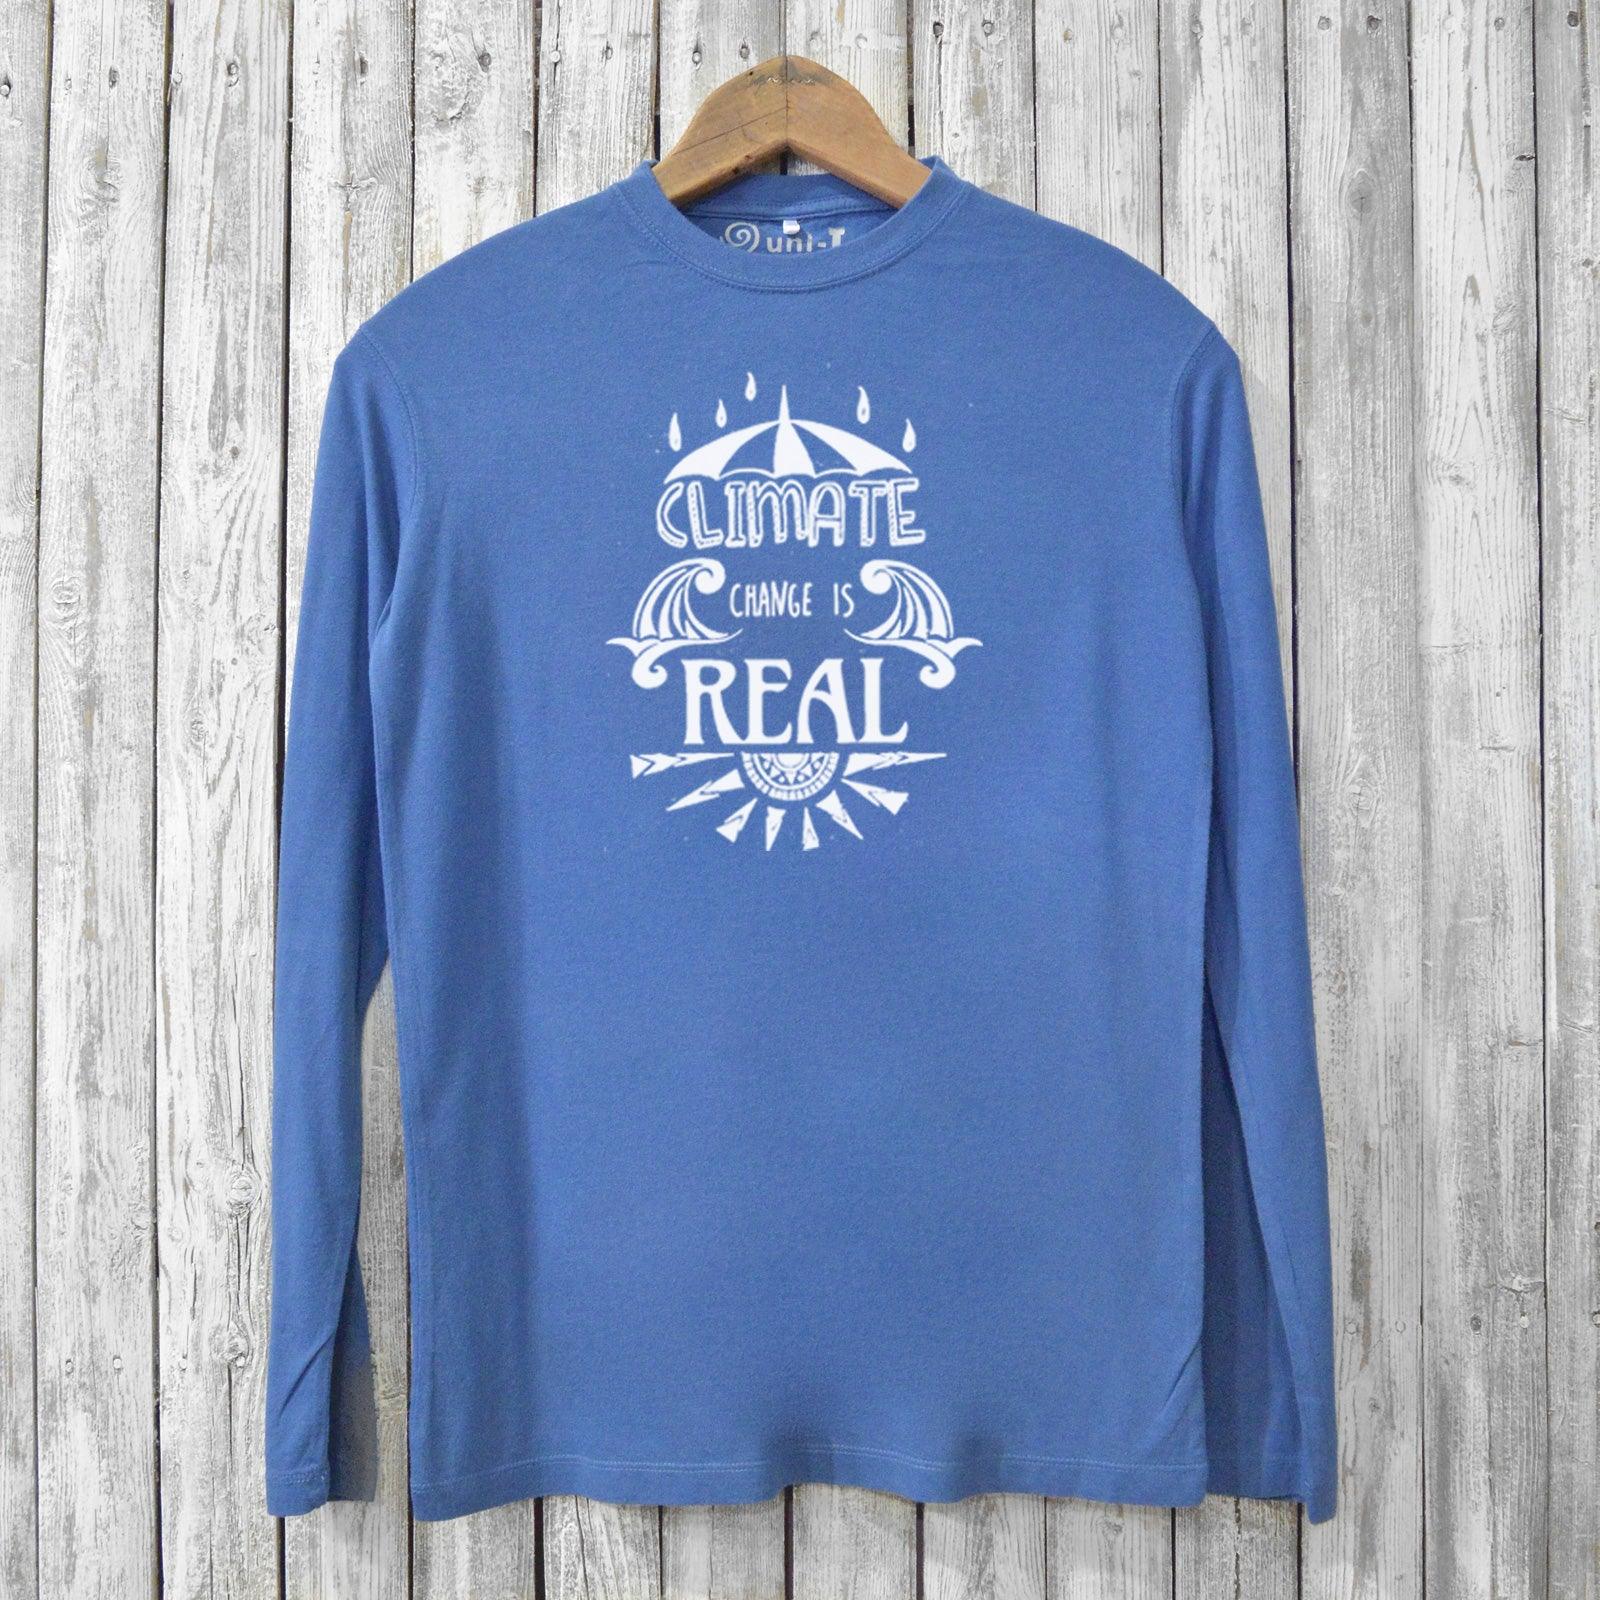 Climate Change Is Real, Long Sleeve T-shirts for Men Uni-T